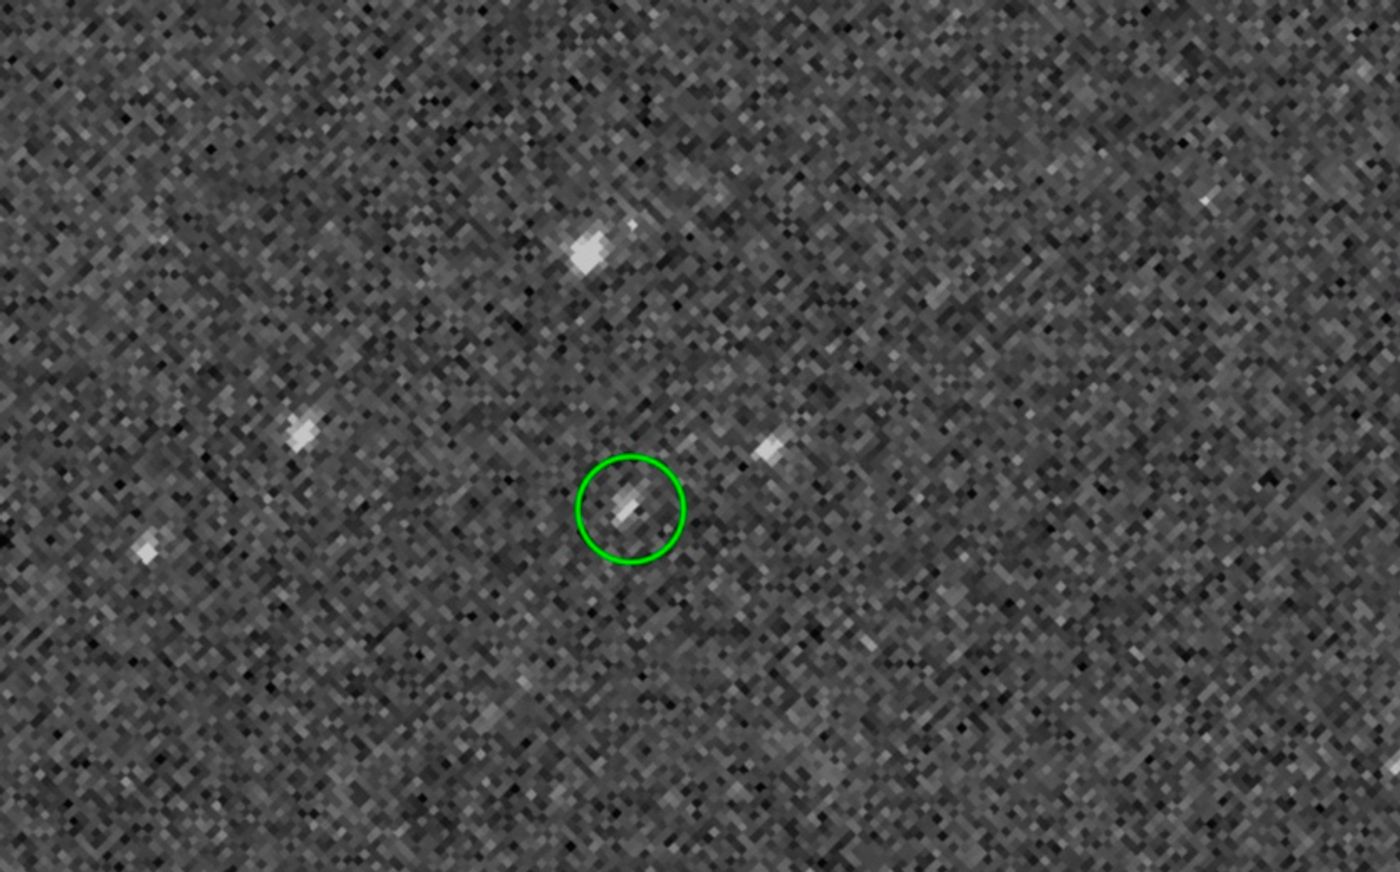 The new image of Bennu captured by the OSIRIS-REx spacecraft.